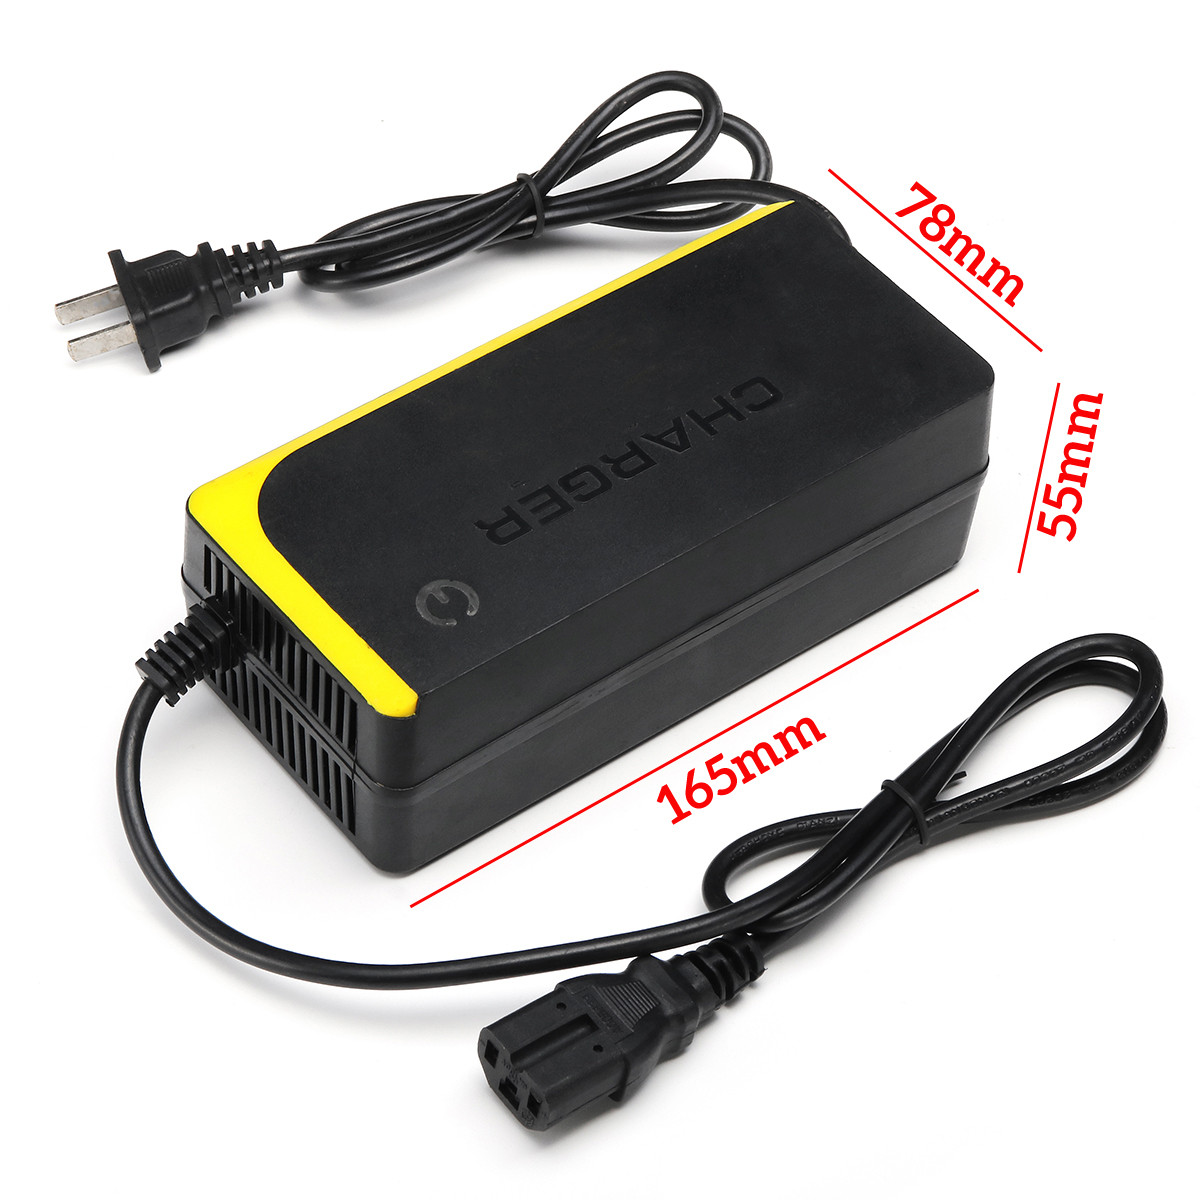 48V-12AH-Electric-Vehicle-Battery-Charger-Lead-Acid-Battery-Charger-Bicycle-Motorcycle-Charger-1400891-9